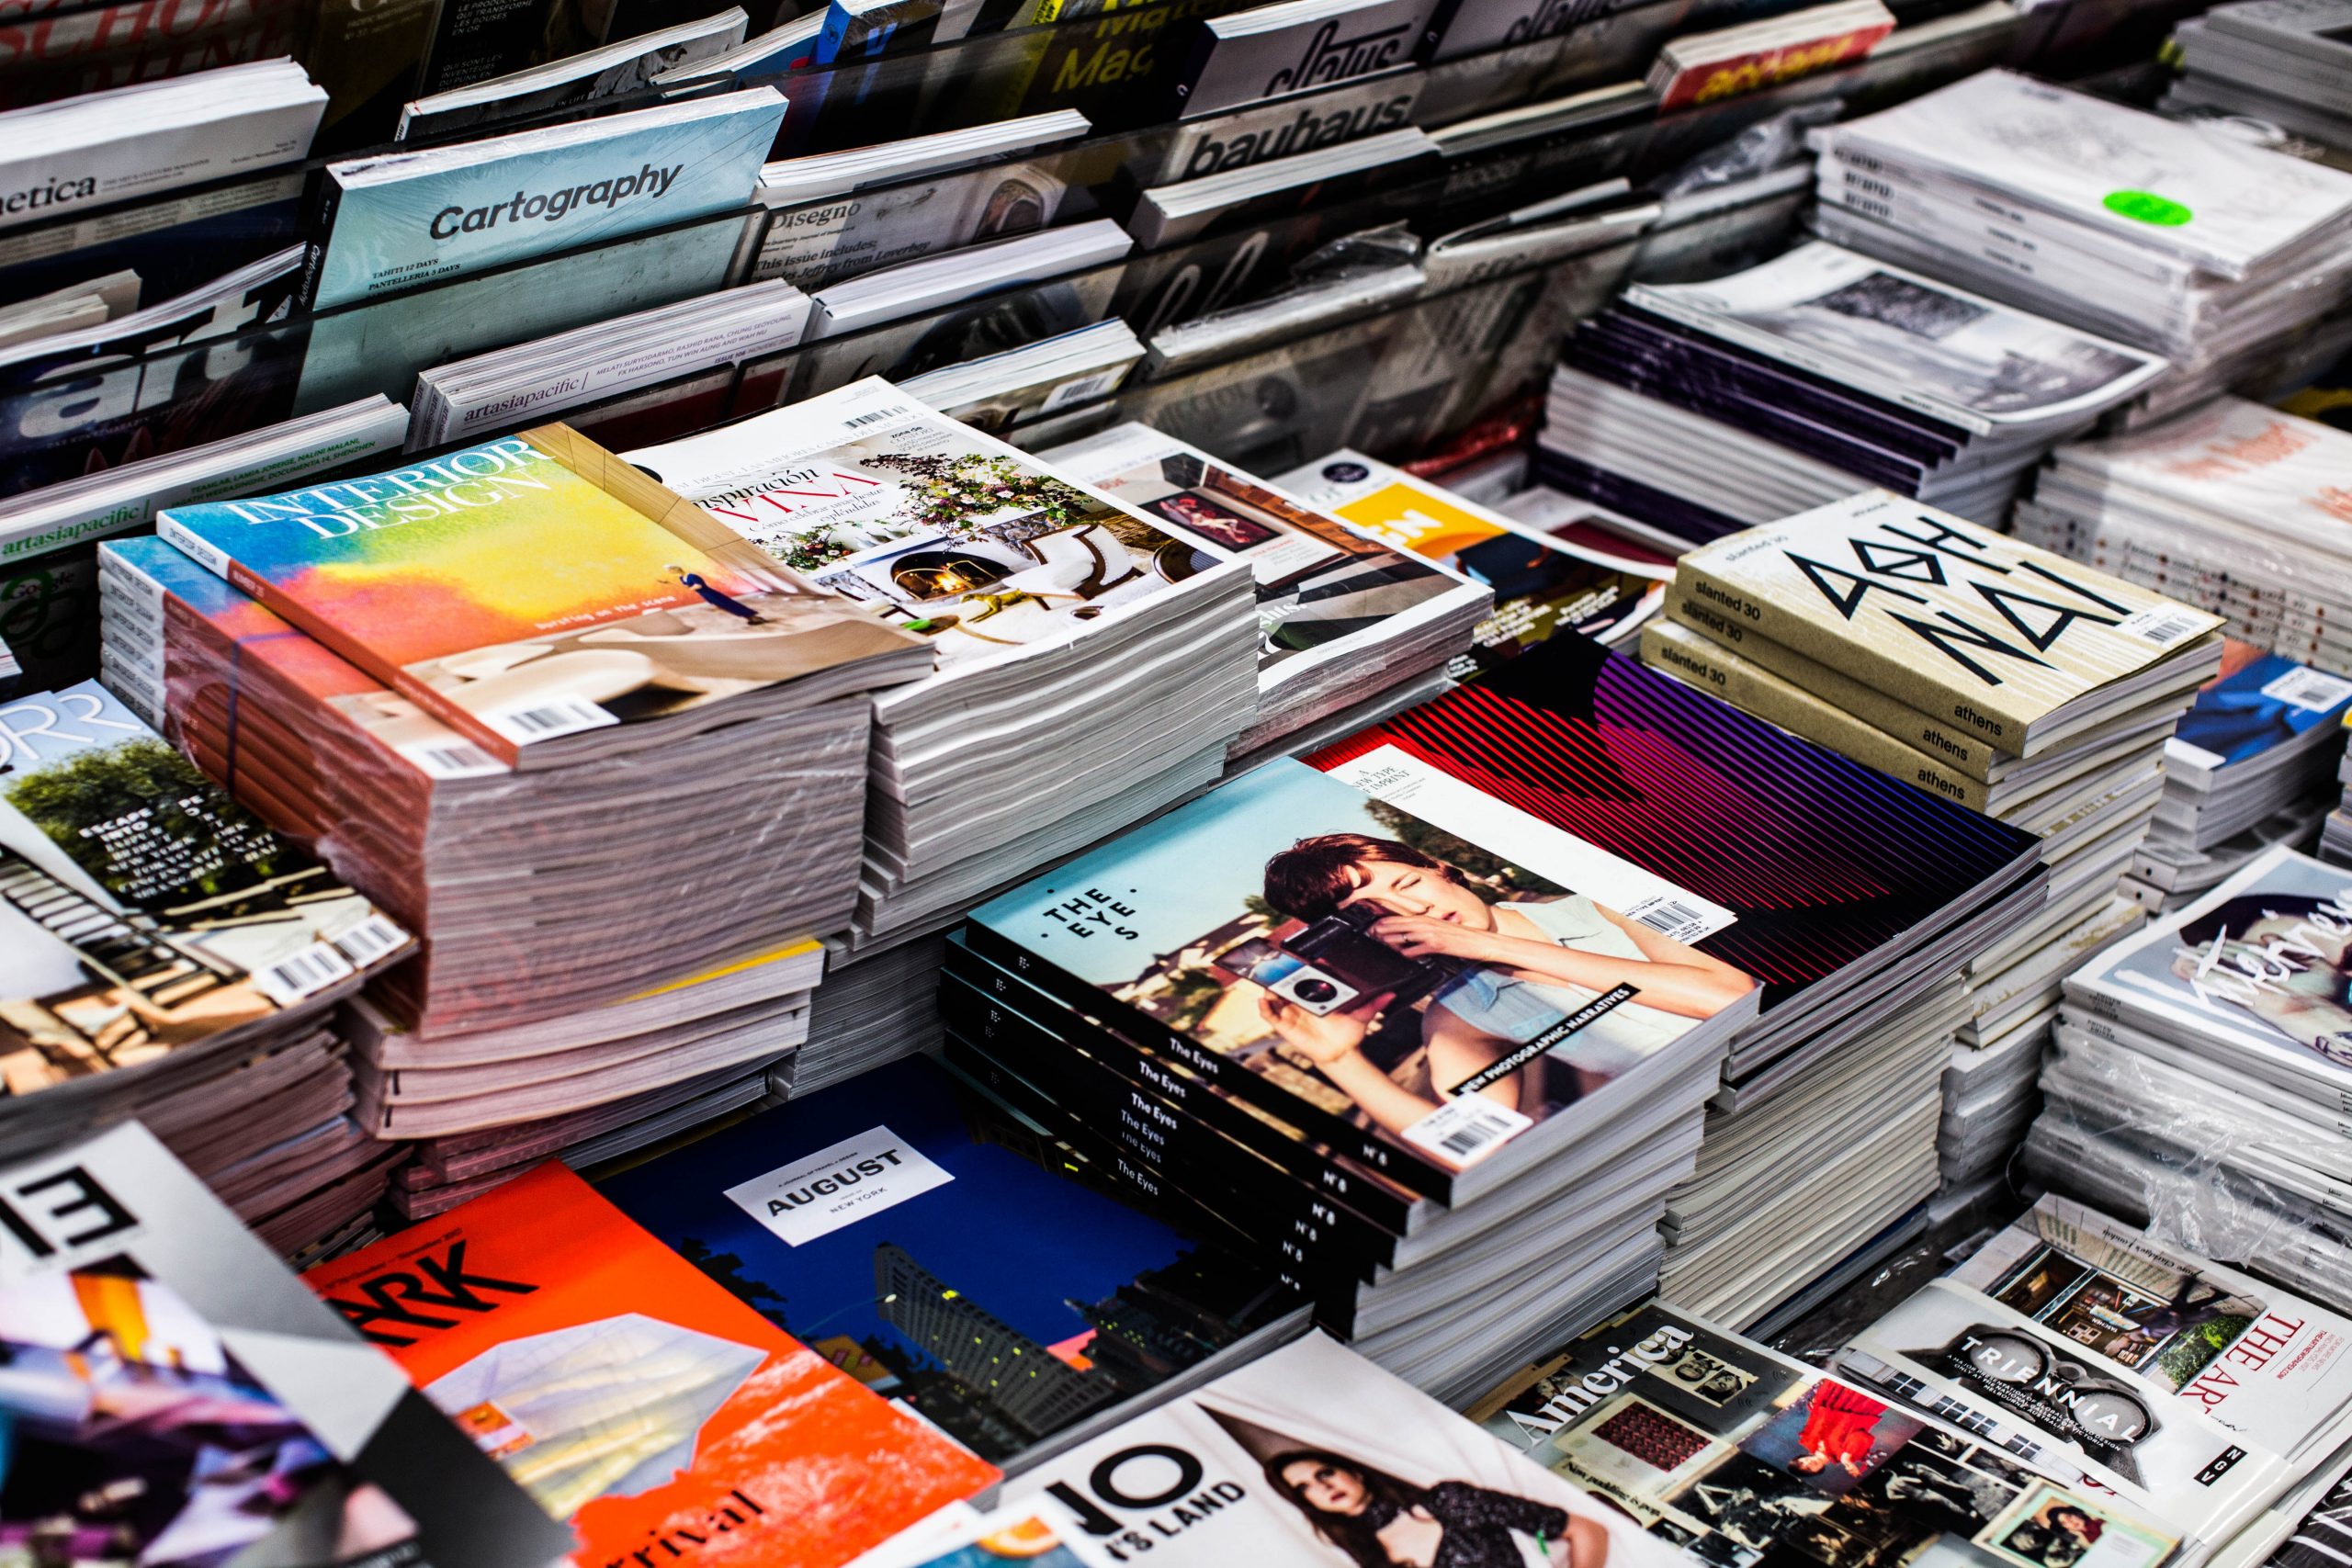 Books and magazines in New York